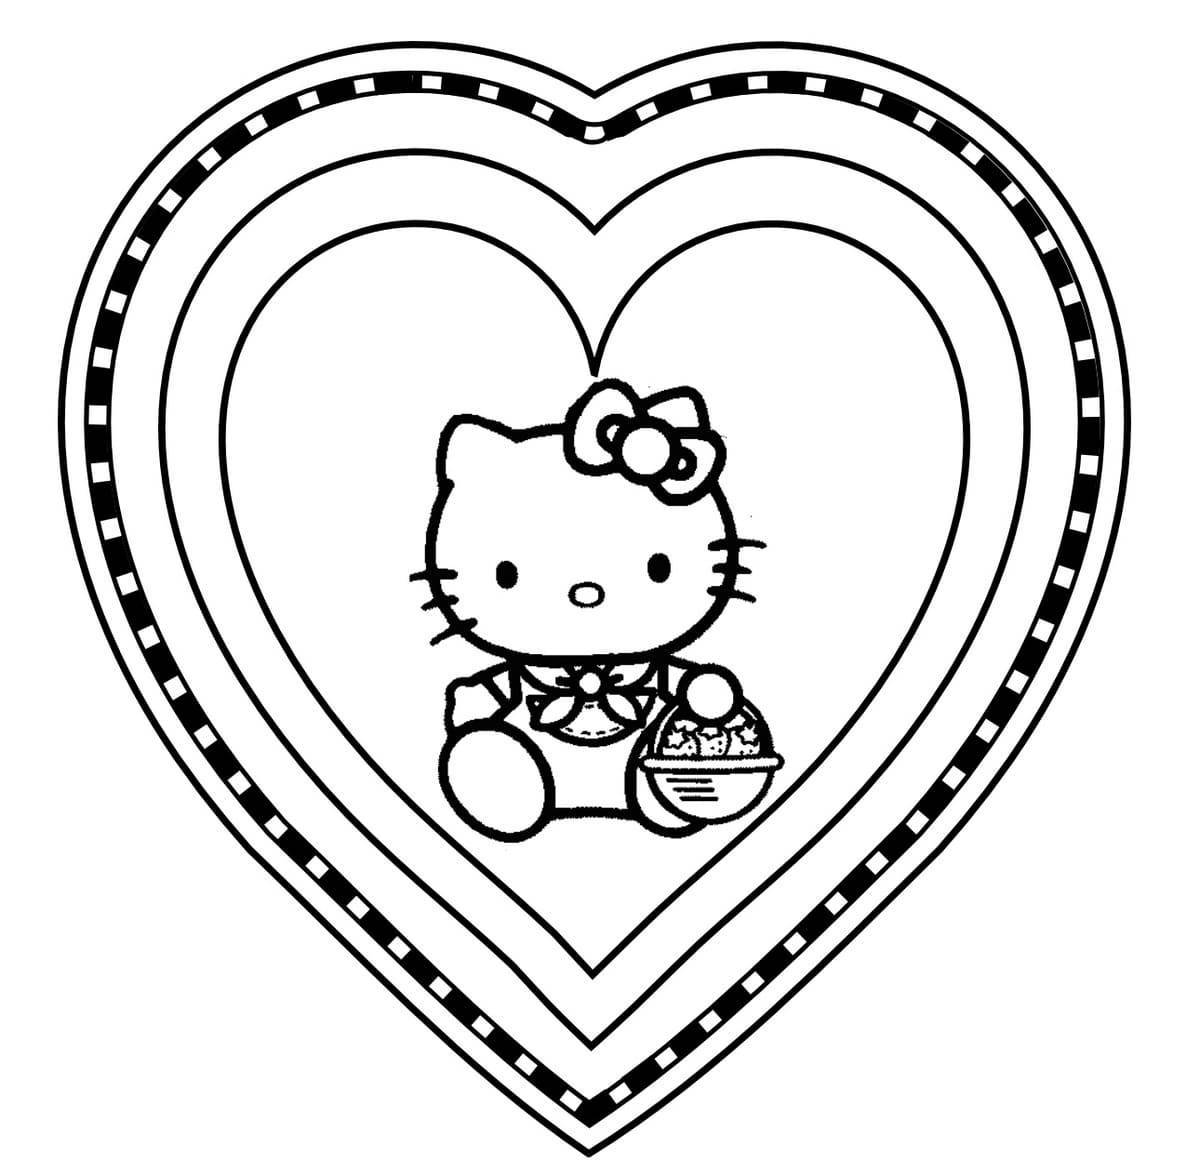 Bright heart coloring book for kids